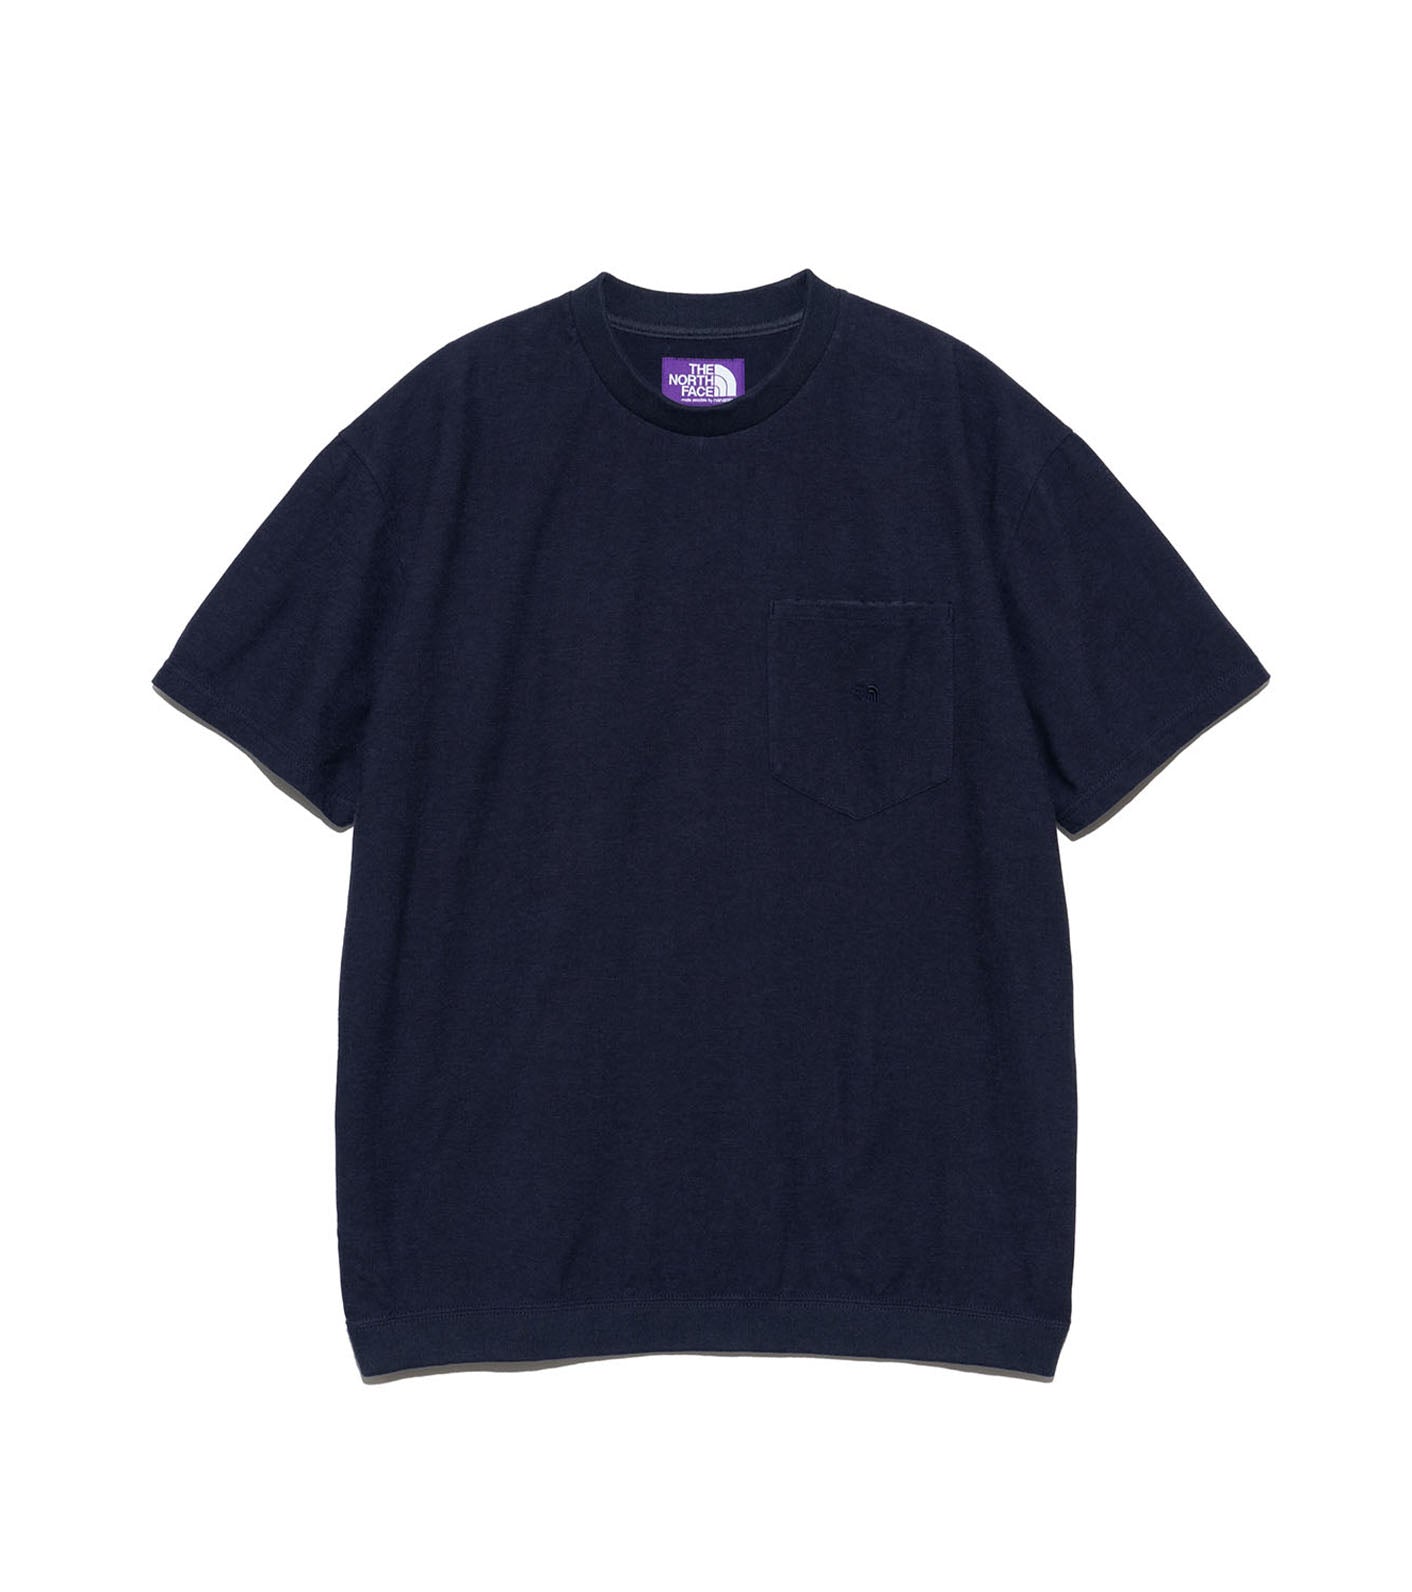 THE NORTH FACE PURPLE LABEL High Bulky Pocket Tee